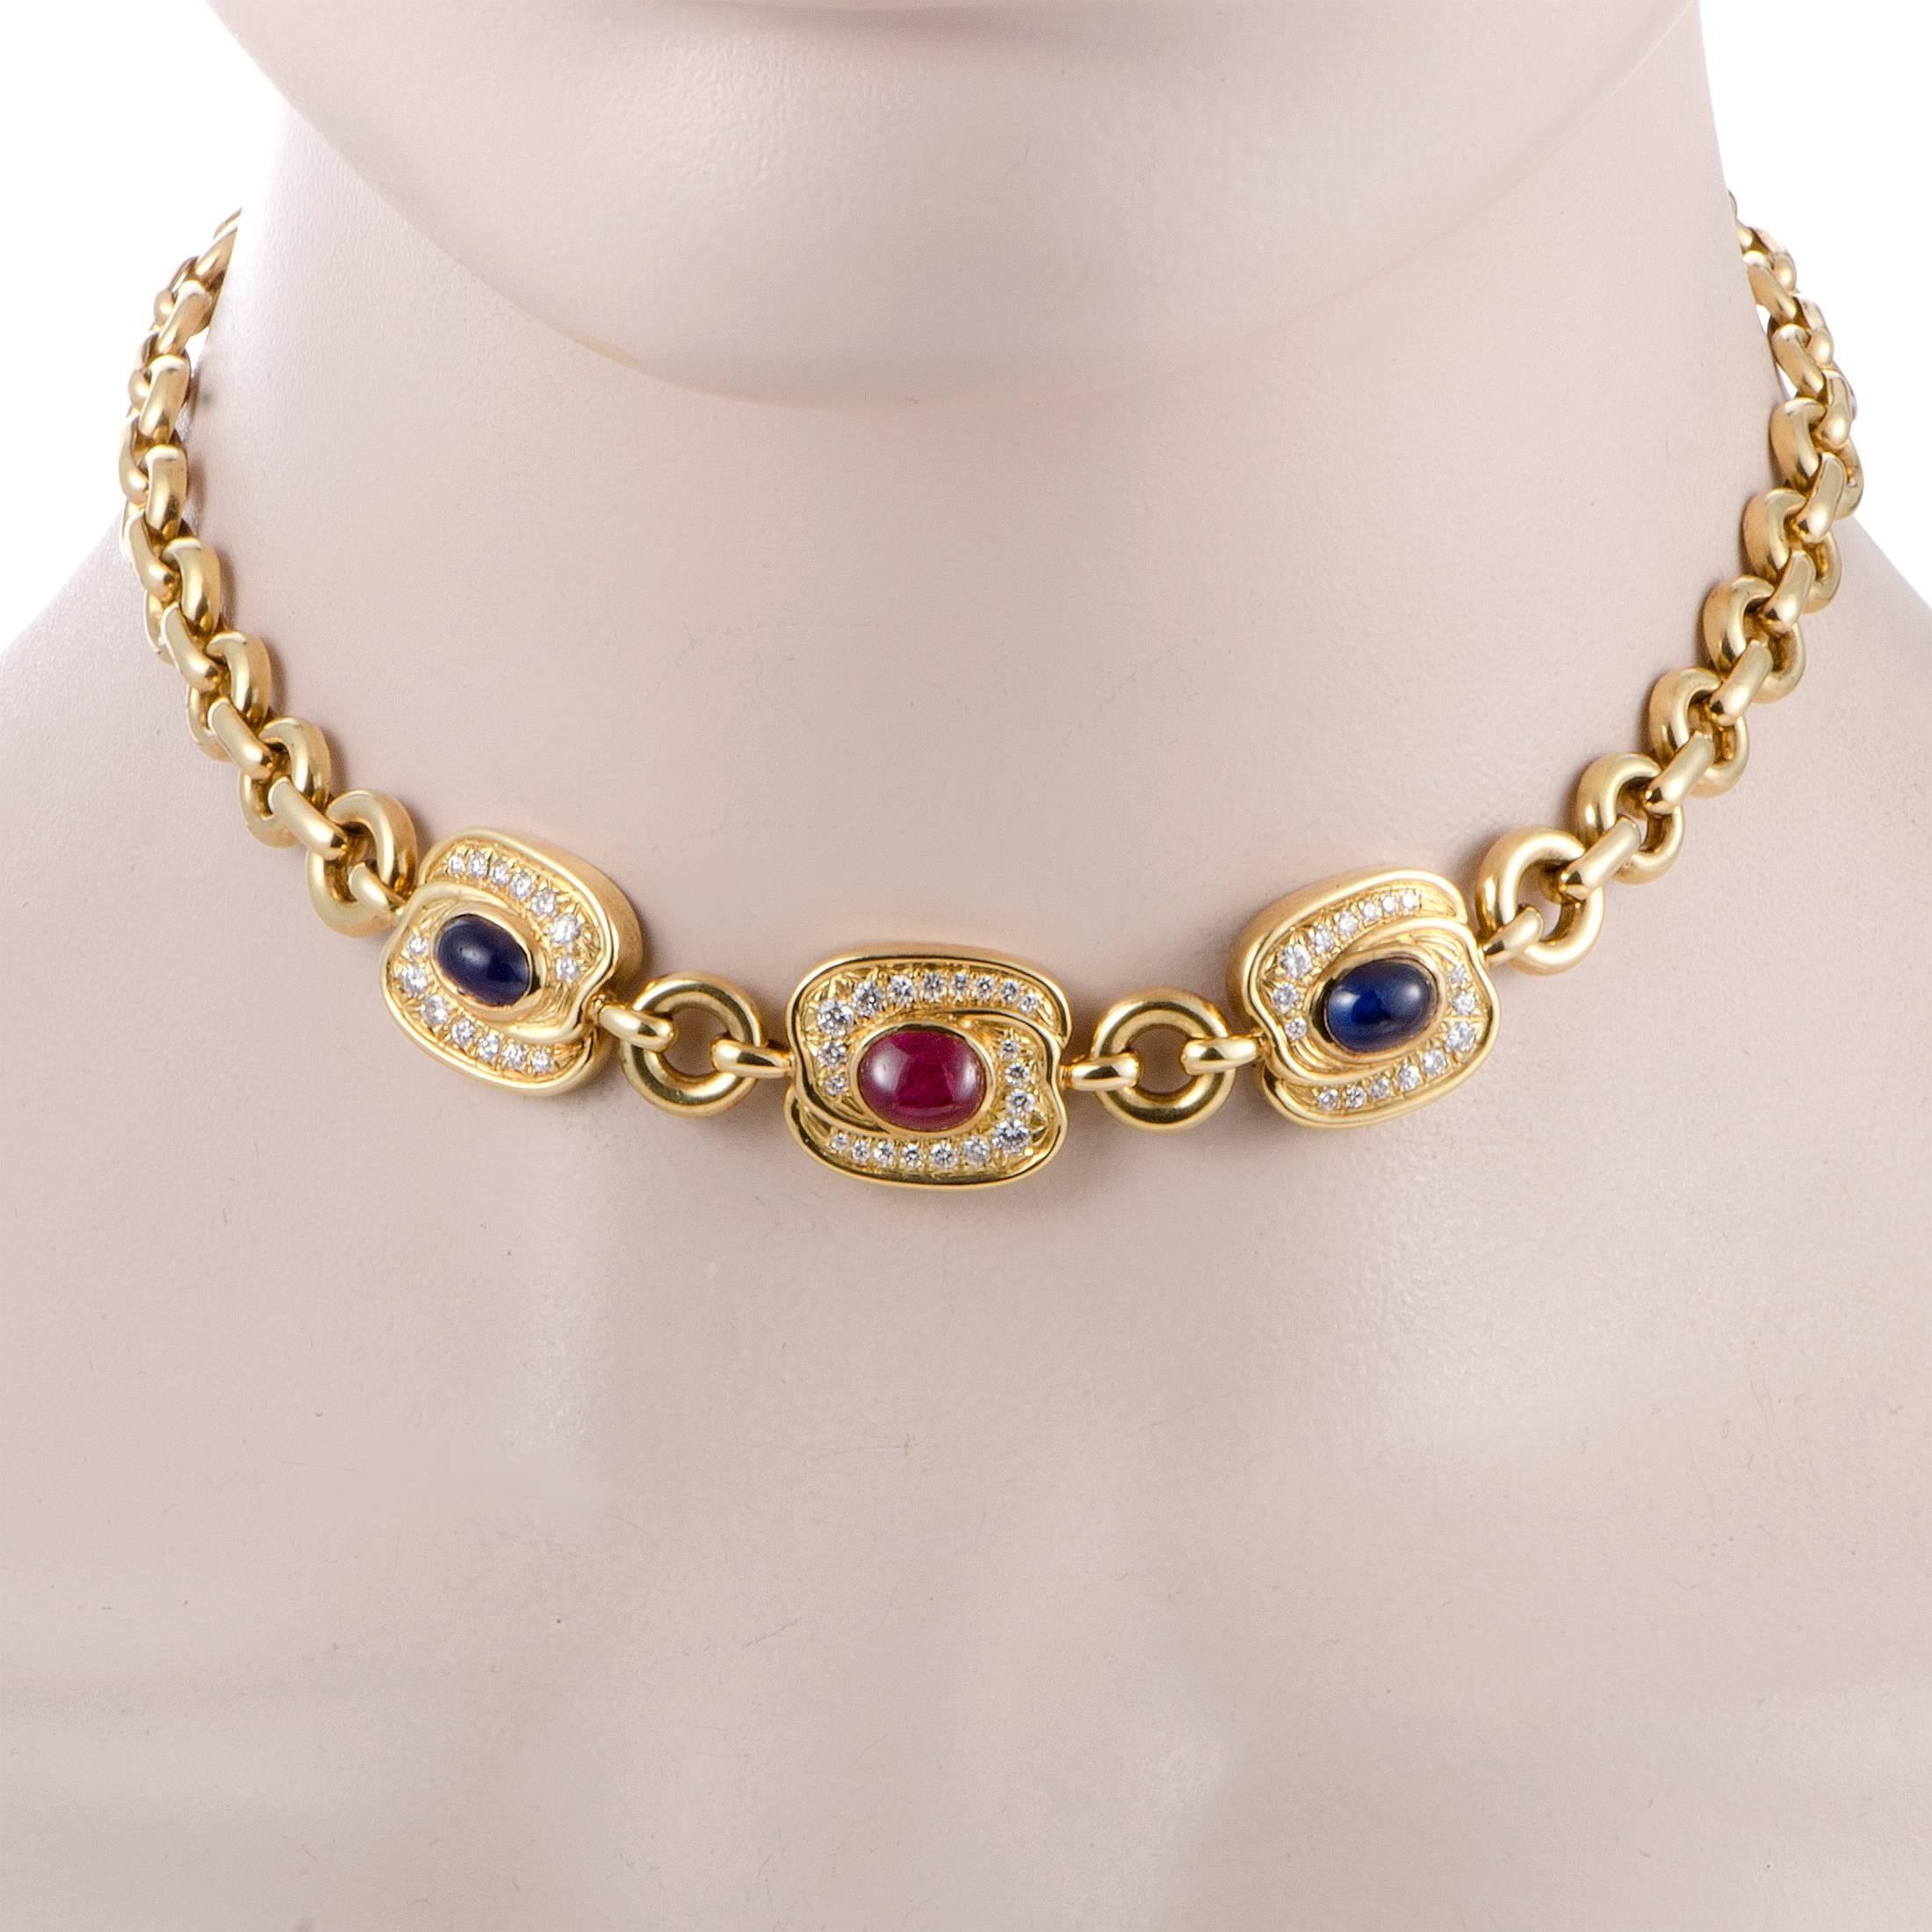 If you wish to accentuate your look with a piece that exudes prestige and opulence, this fabulous necklace is the perfect choice. Designed by Van Cleef & Arpels, the necklace is made of 18K yellow gold and decorated with two sapphires, a ruby, and